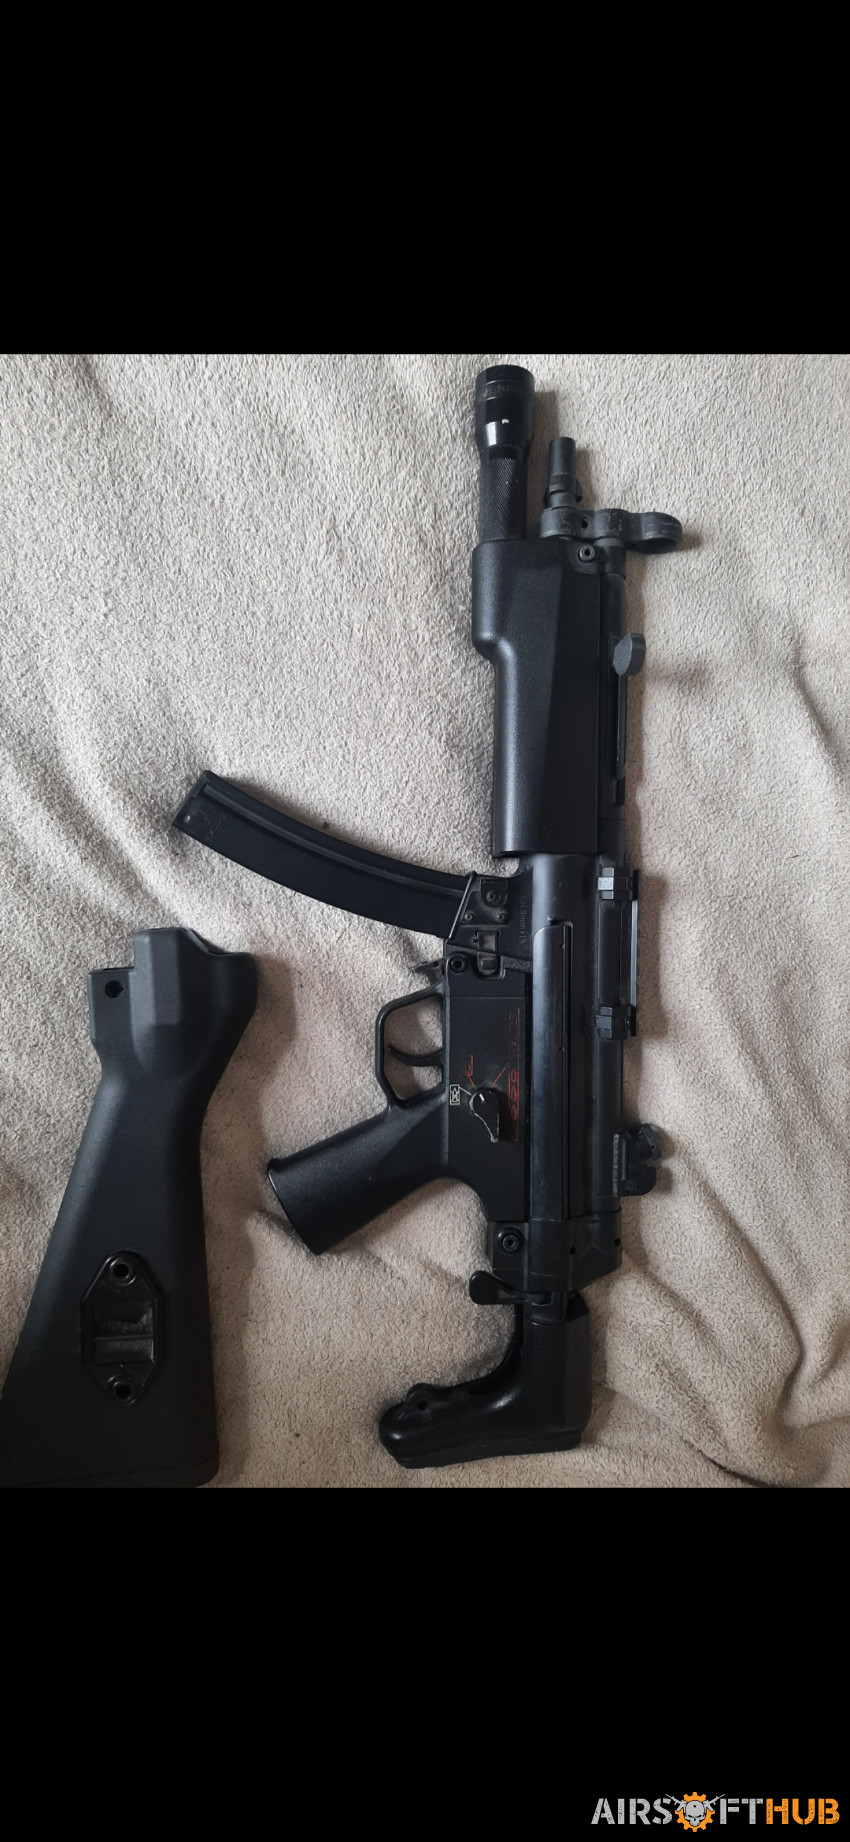 M16a1 / m249 trades - Used airsoft equipment